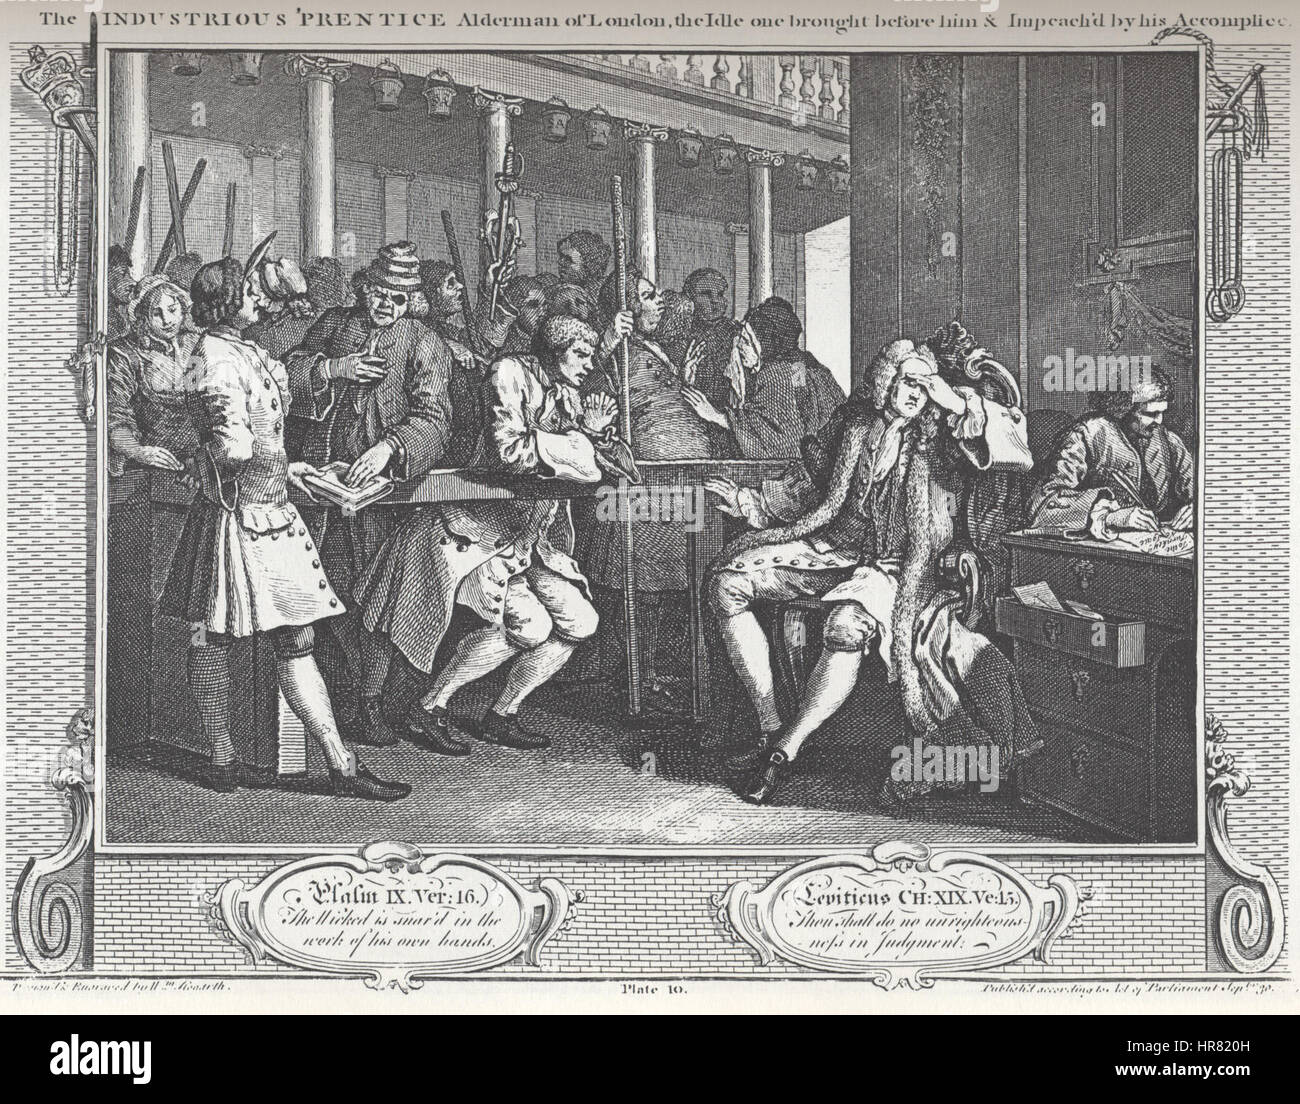 William Hogarth - Industry and Idleness, Plate 10; The Industrious 'Prentice Alderman of London, the Idle on brought before him & Impreach'd by his Accomplice Stock Photo